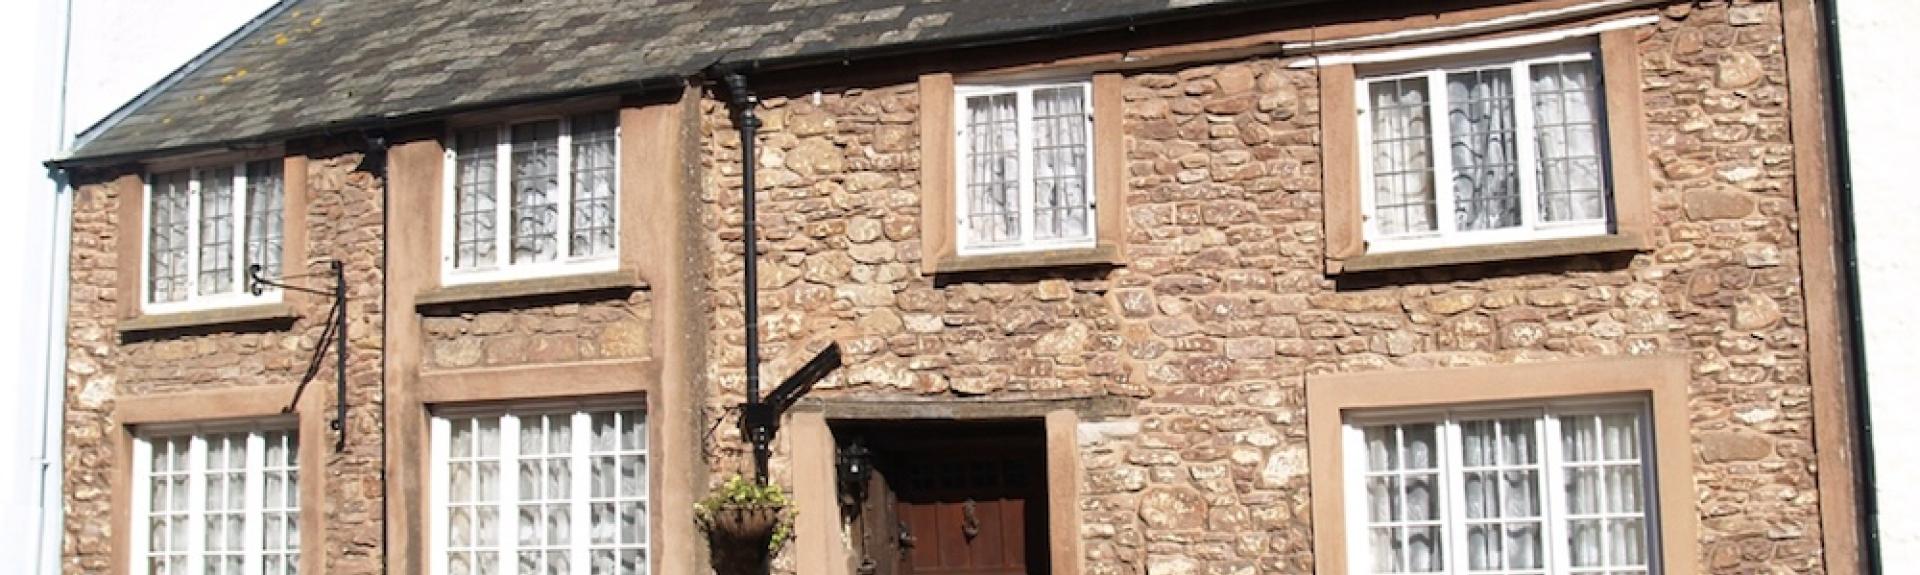 Exterior of a double-fronted stone holiday cottage in Dunster nestling into a steep wooded hillside.